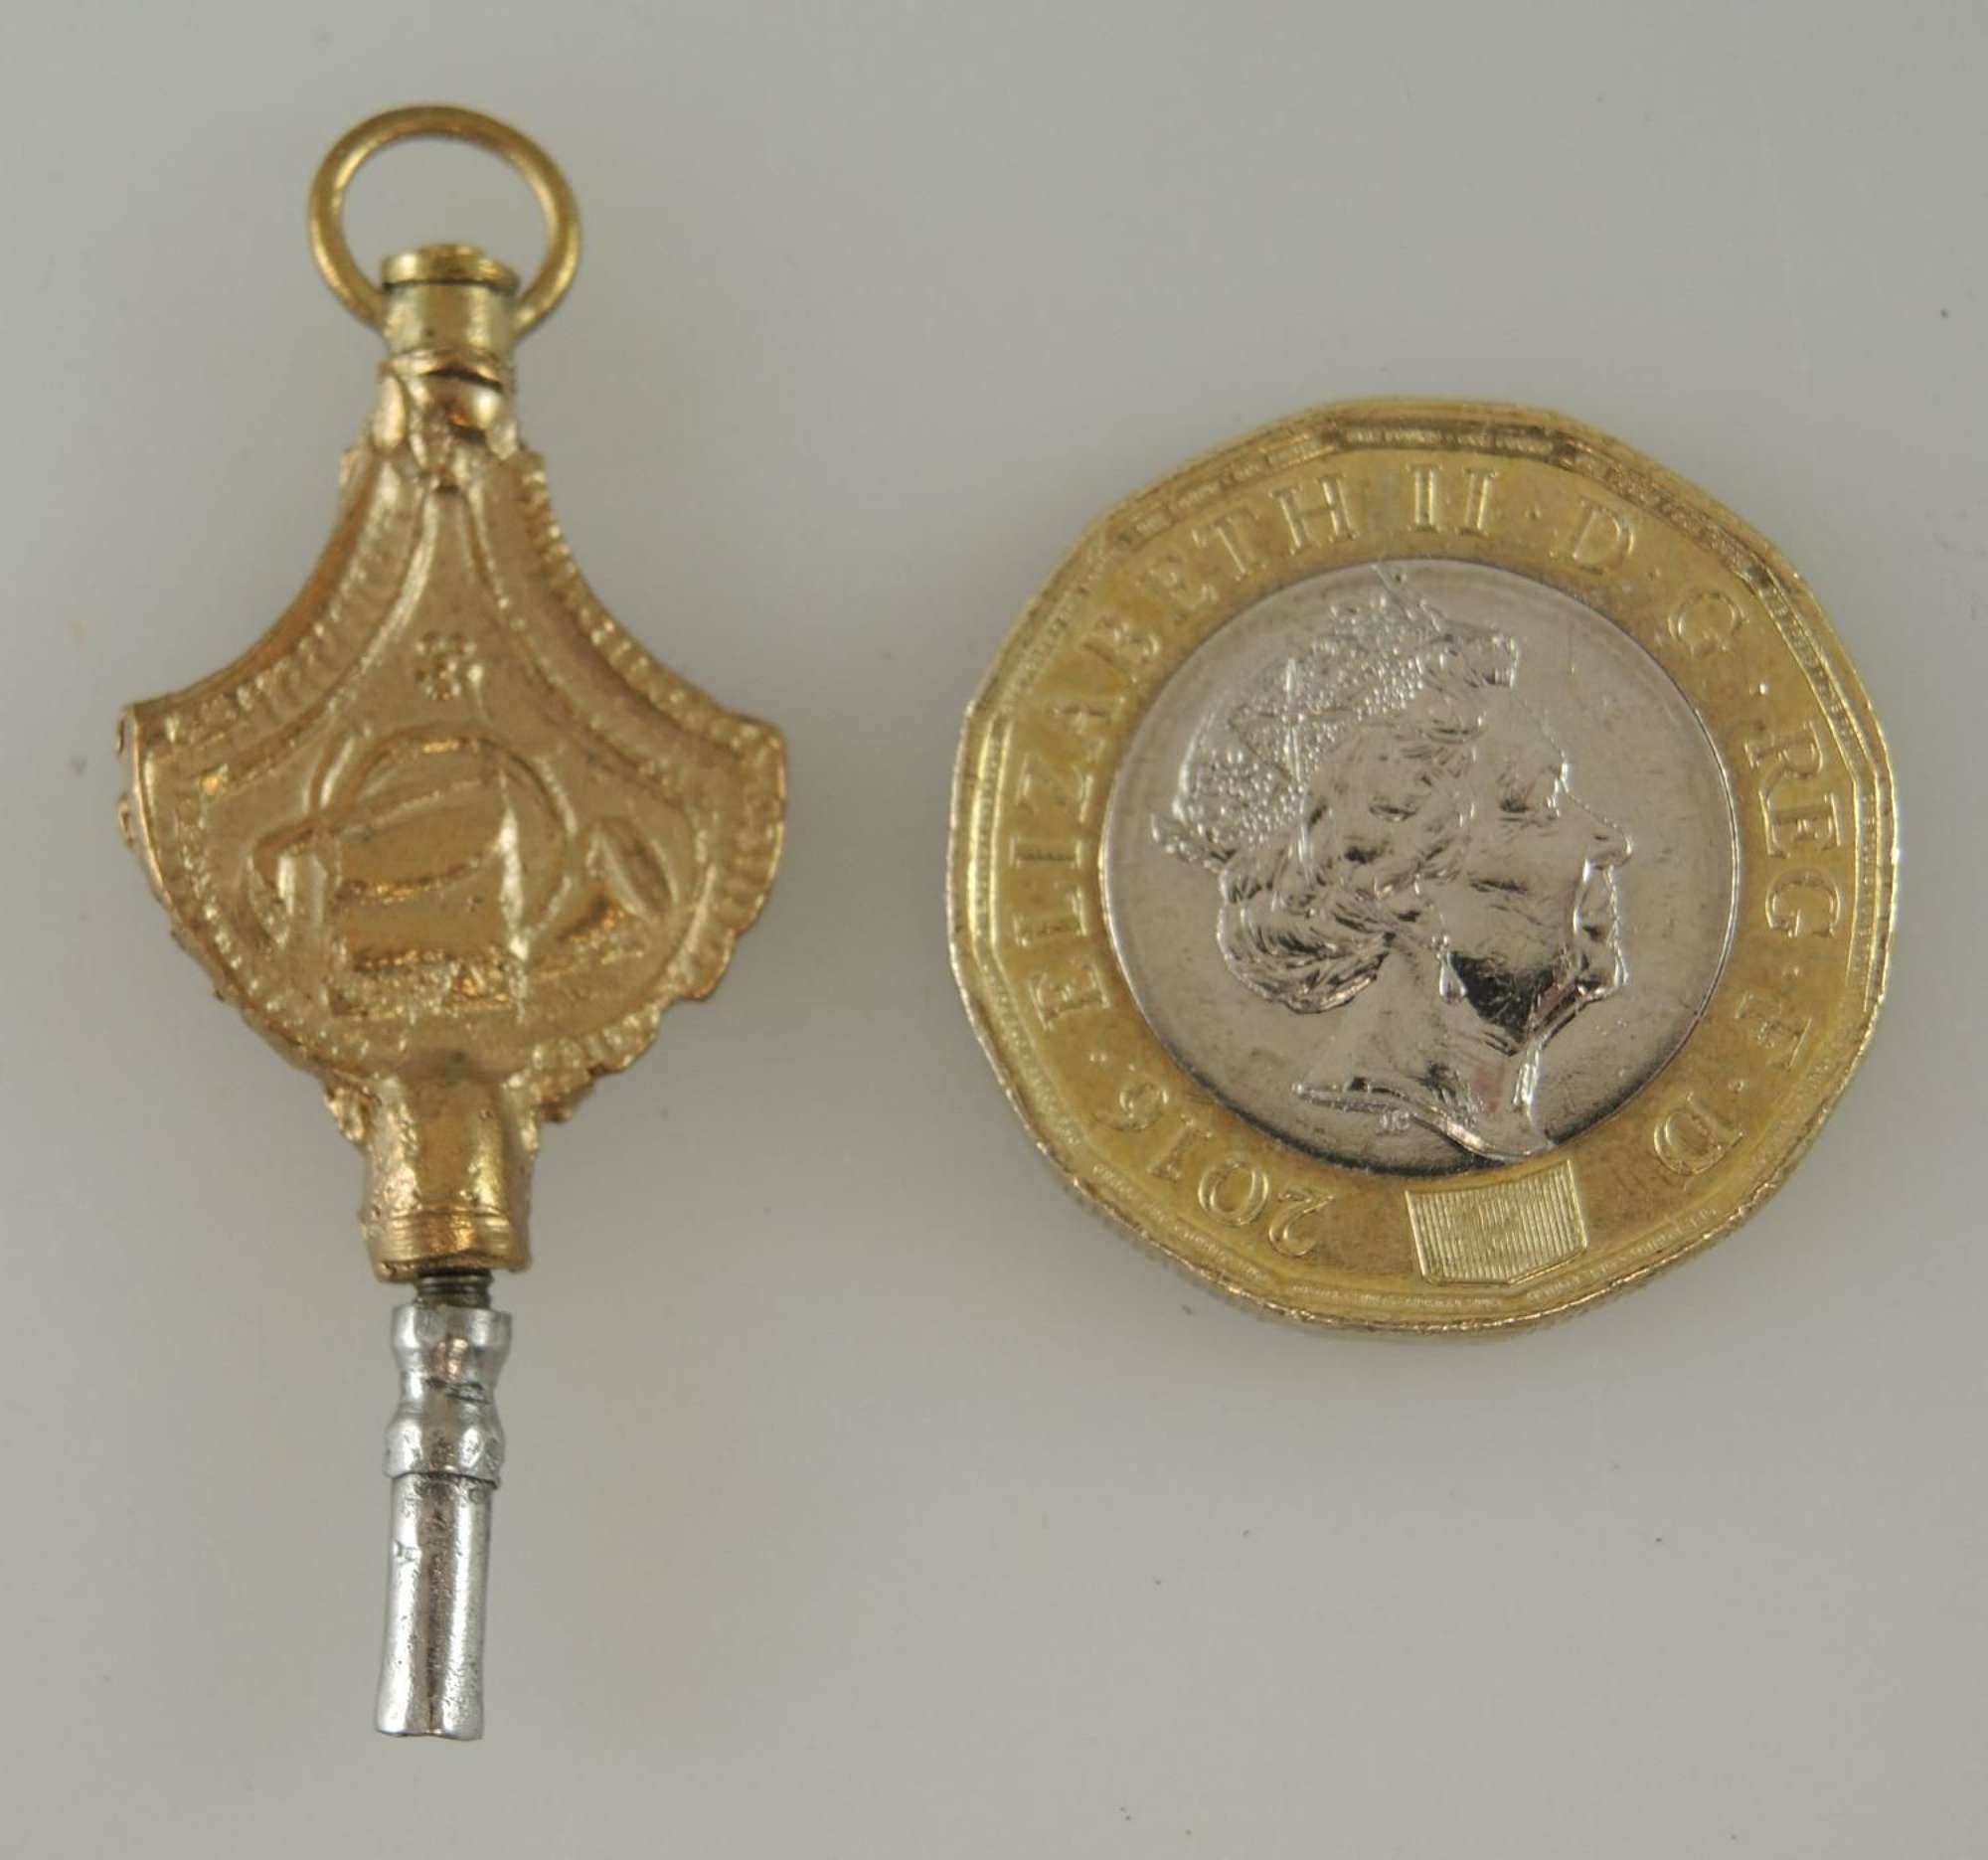 Early French COUNTRY LIFE MOTIF Pocket Watch Key. Circa 1810